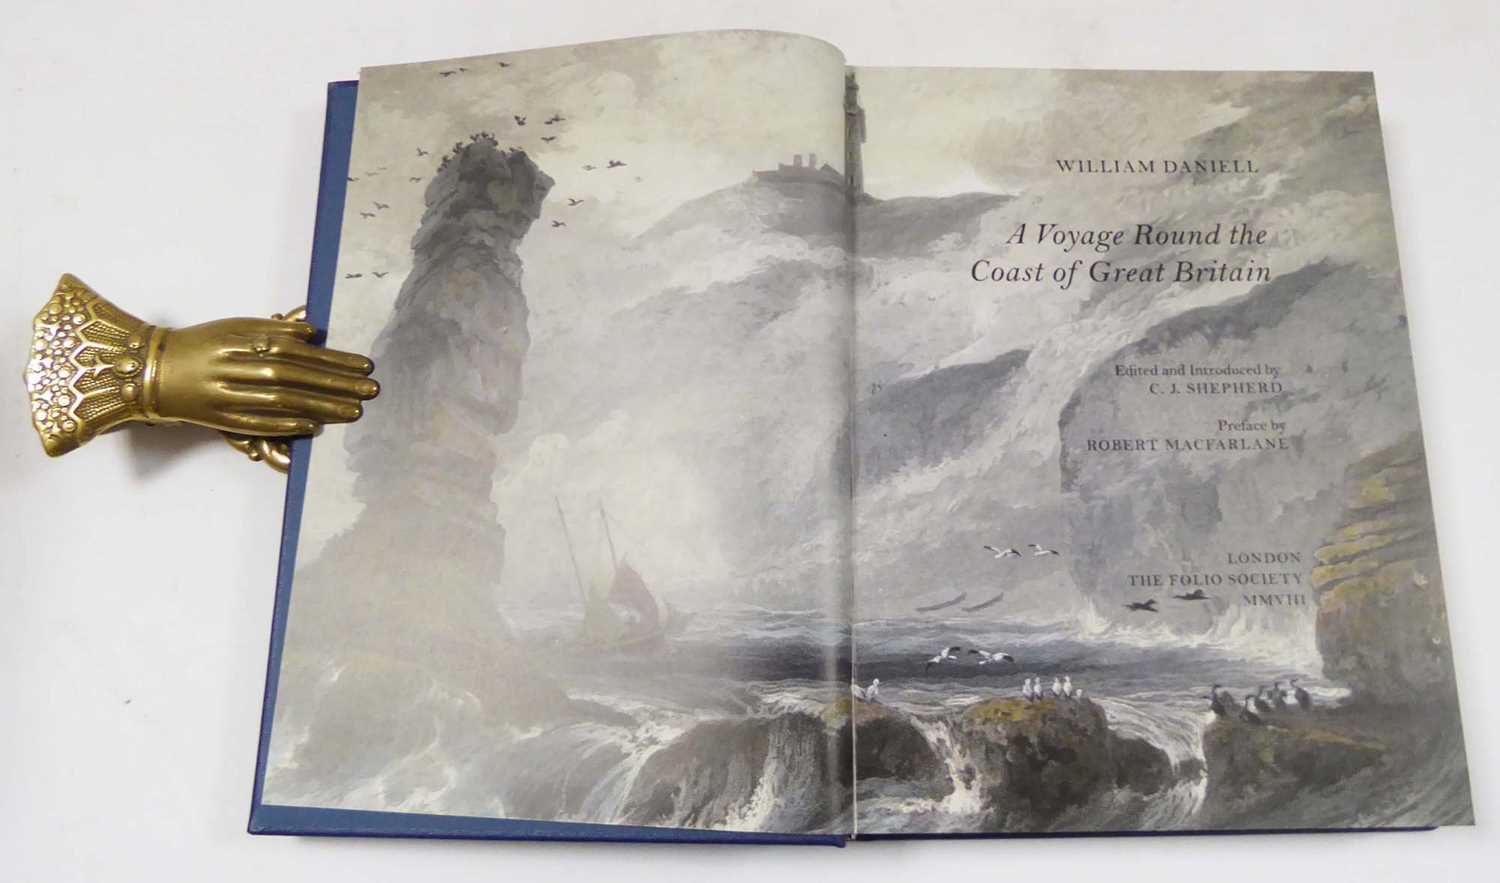 Folio Society : William Daniell : A Voyage Round the Coast of Great Britain, 2008; Charles Dickens : - Image 5 of 7